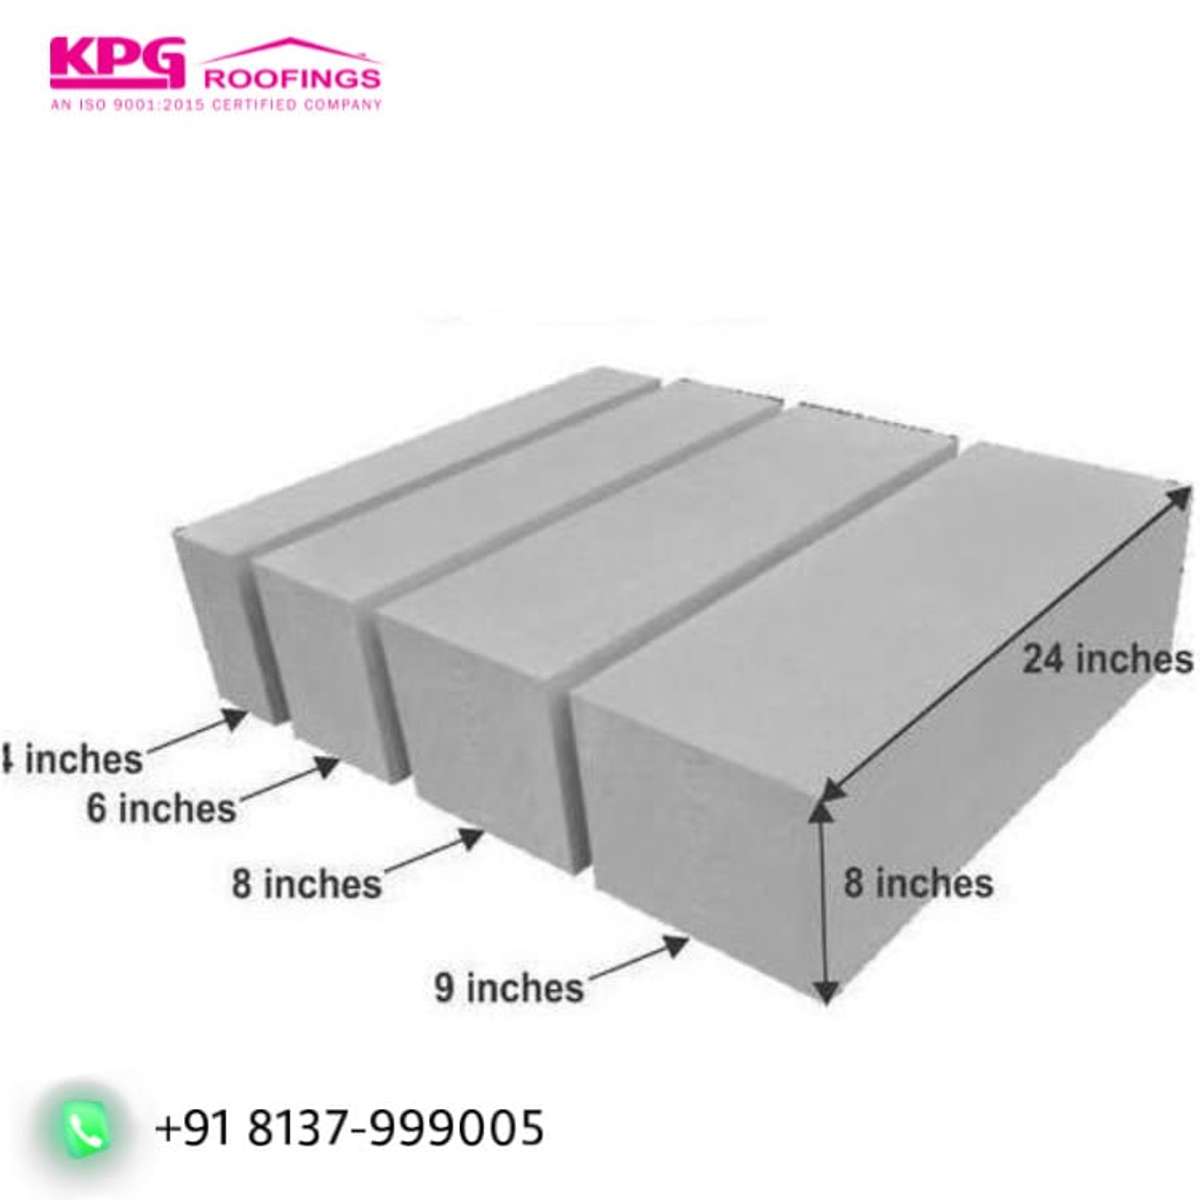 Designs by Building Supplies KPG ROOFING, Kozhikode | Kolo